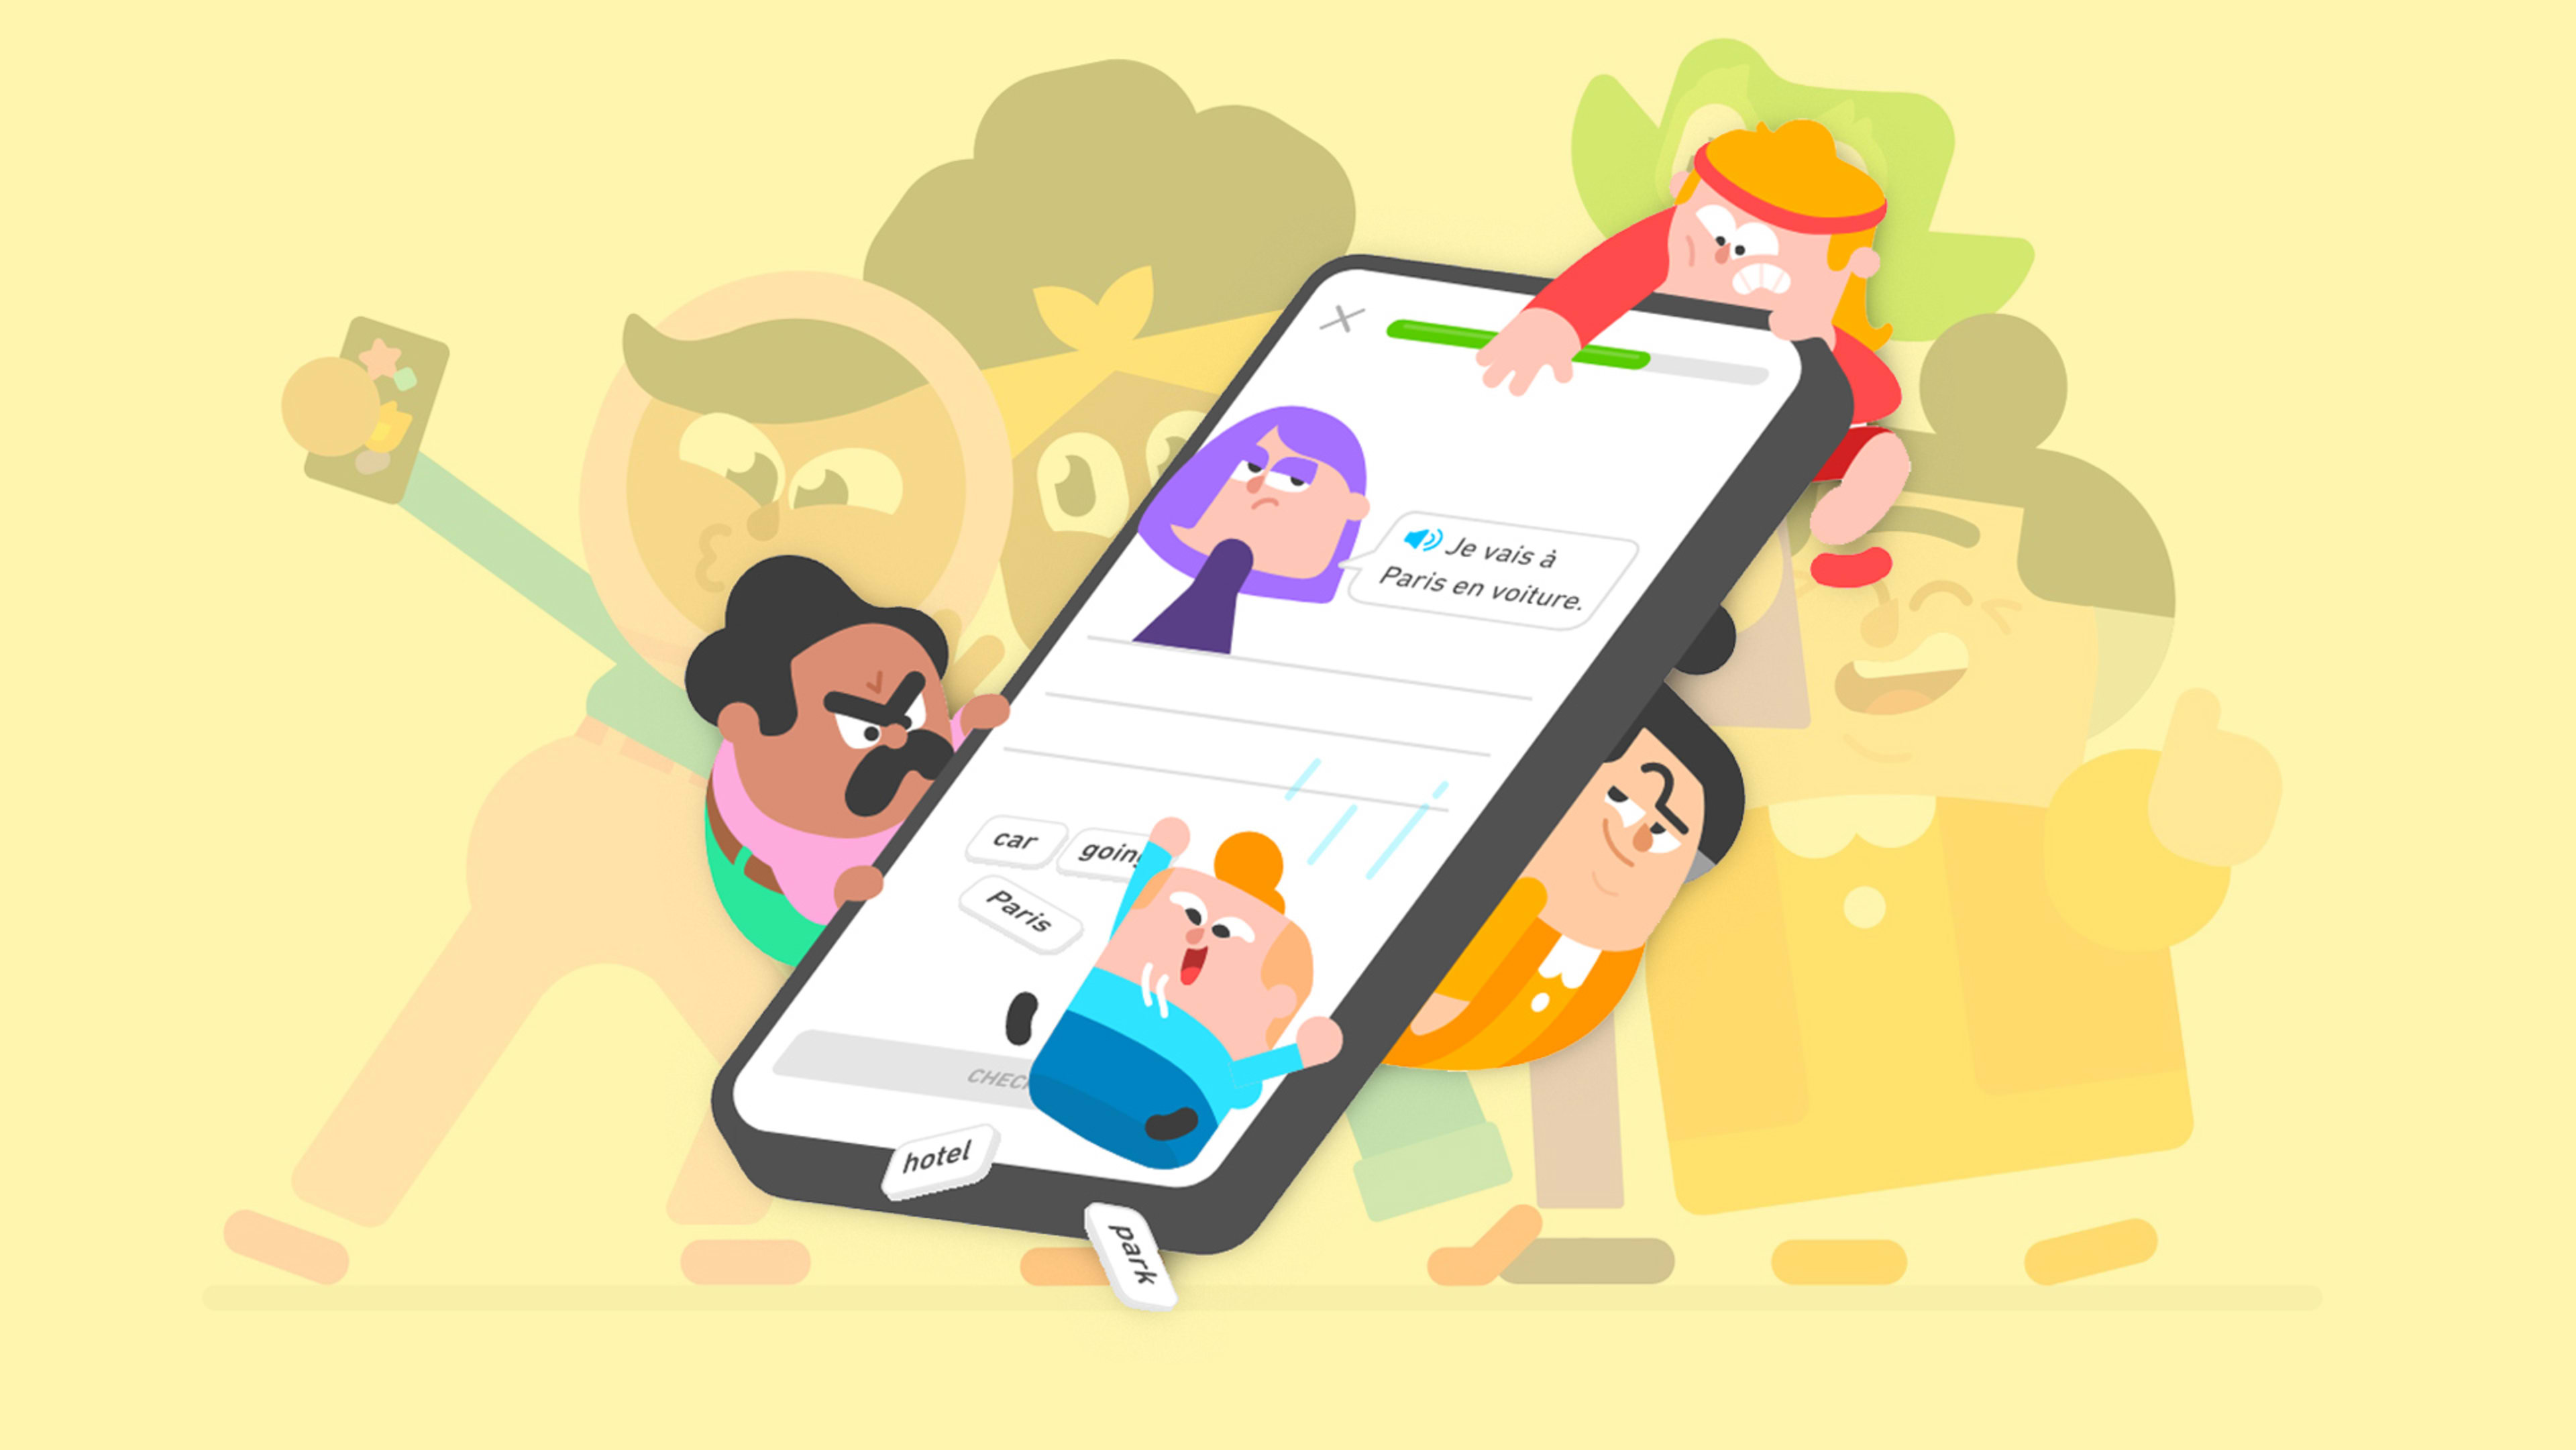 Duolingo wants to be the ‘Sesame Street’ for adults